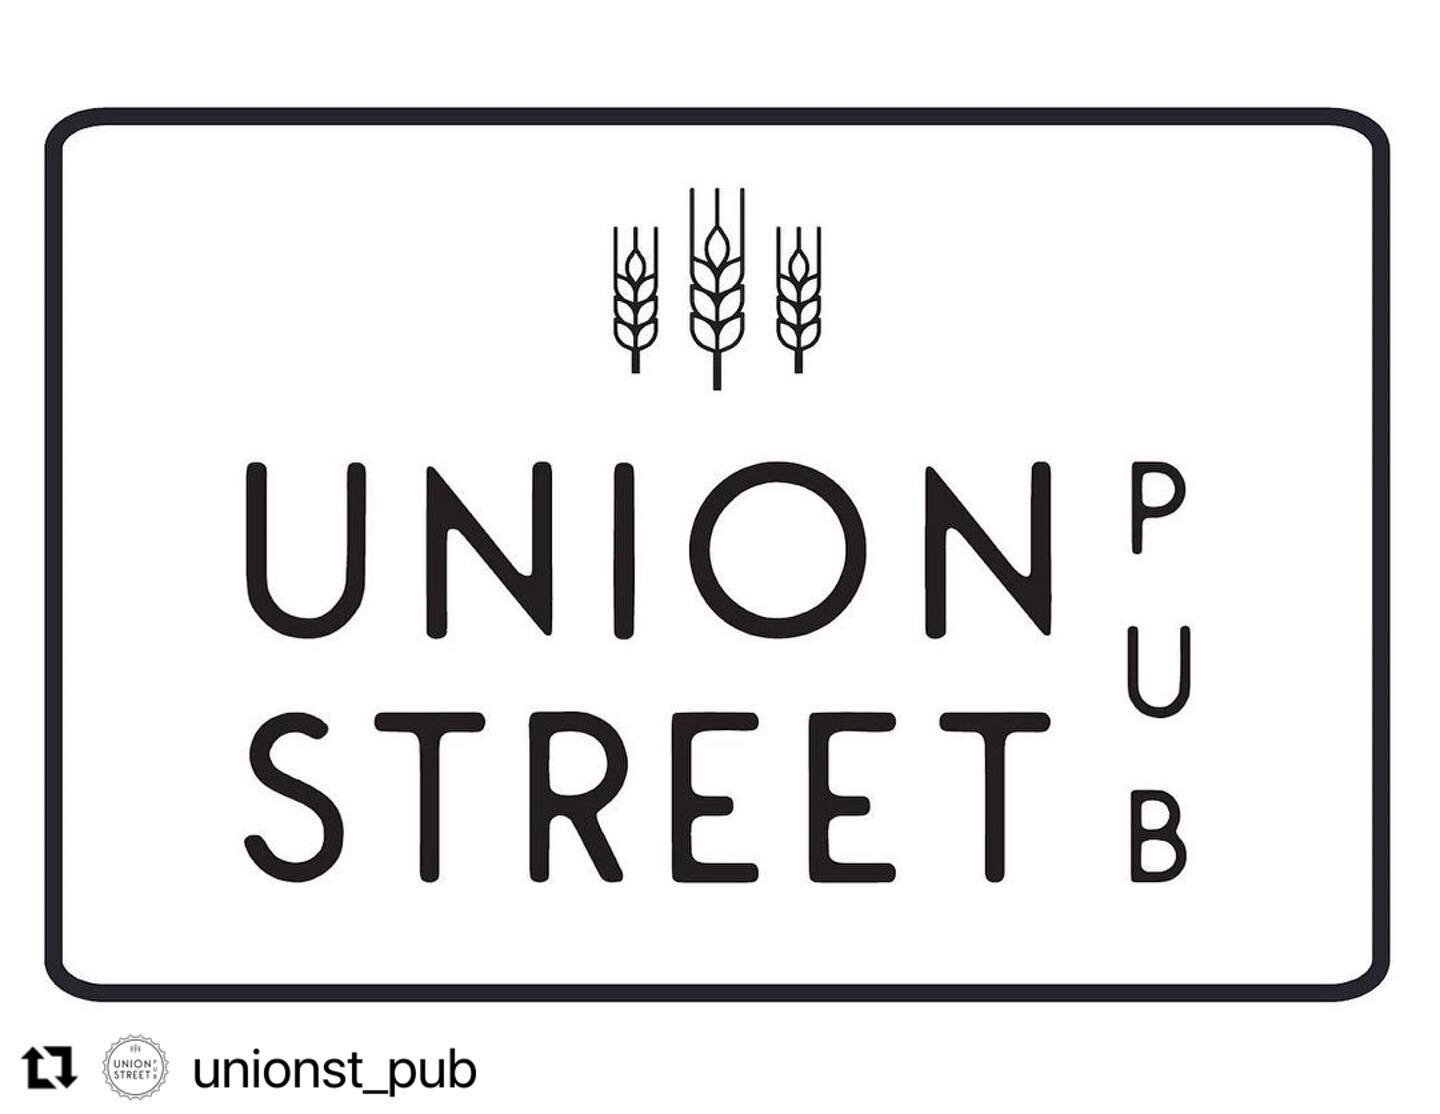 Loved creating this clean, classic logo for a new pub coming soon to Union Street in Wilmington!⁣
⁣
#Repost from @unionst_pub⁣
・・・⁣
Well hello new logo!⁣
⁣
Thank you @blairlindleydesigns for helping us with the design of our new logo. We couldn&rsquo